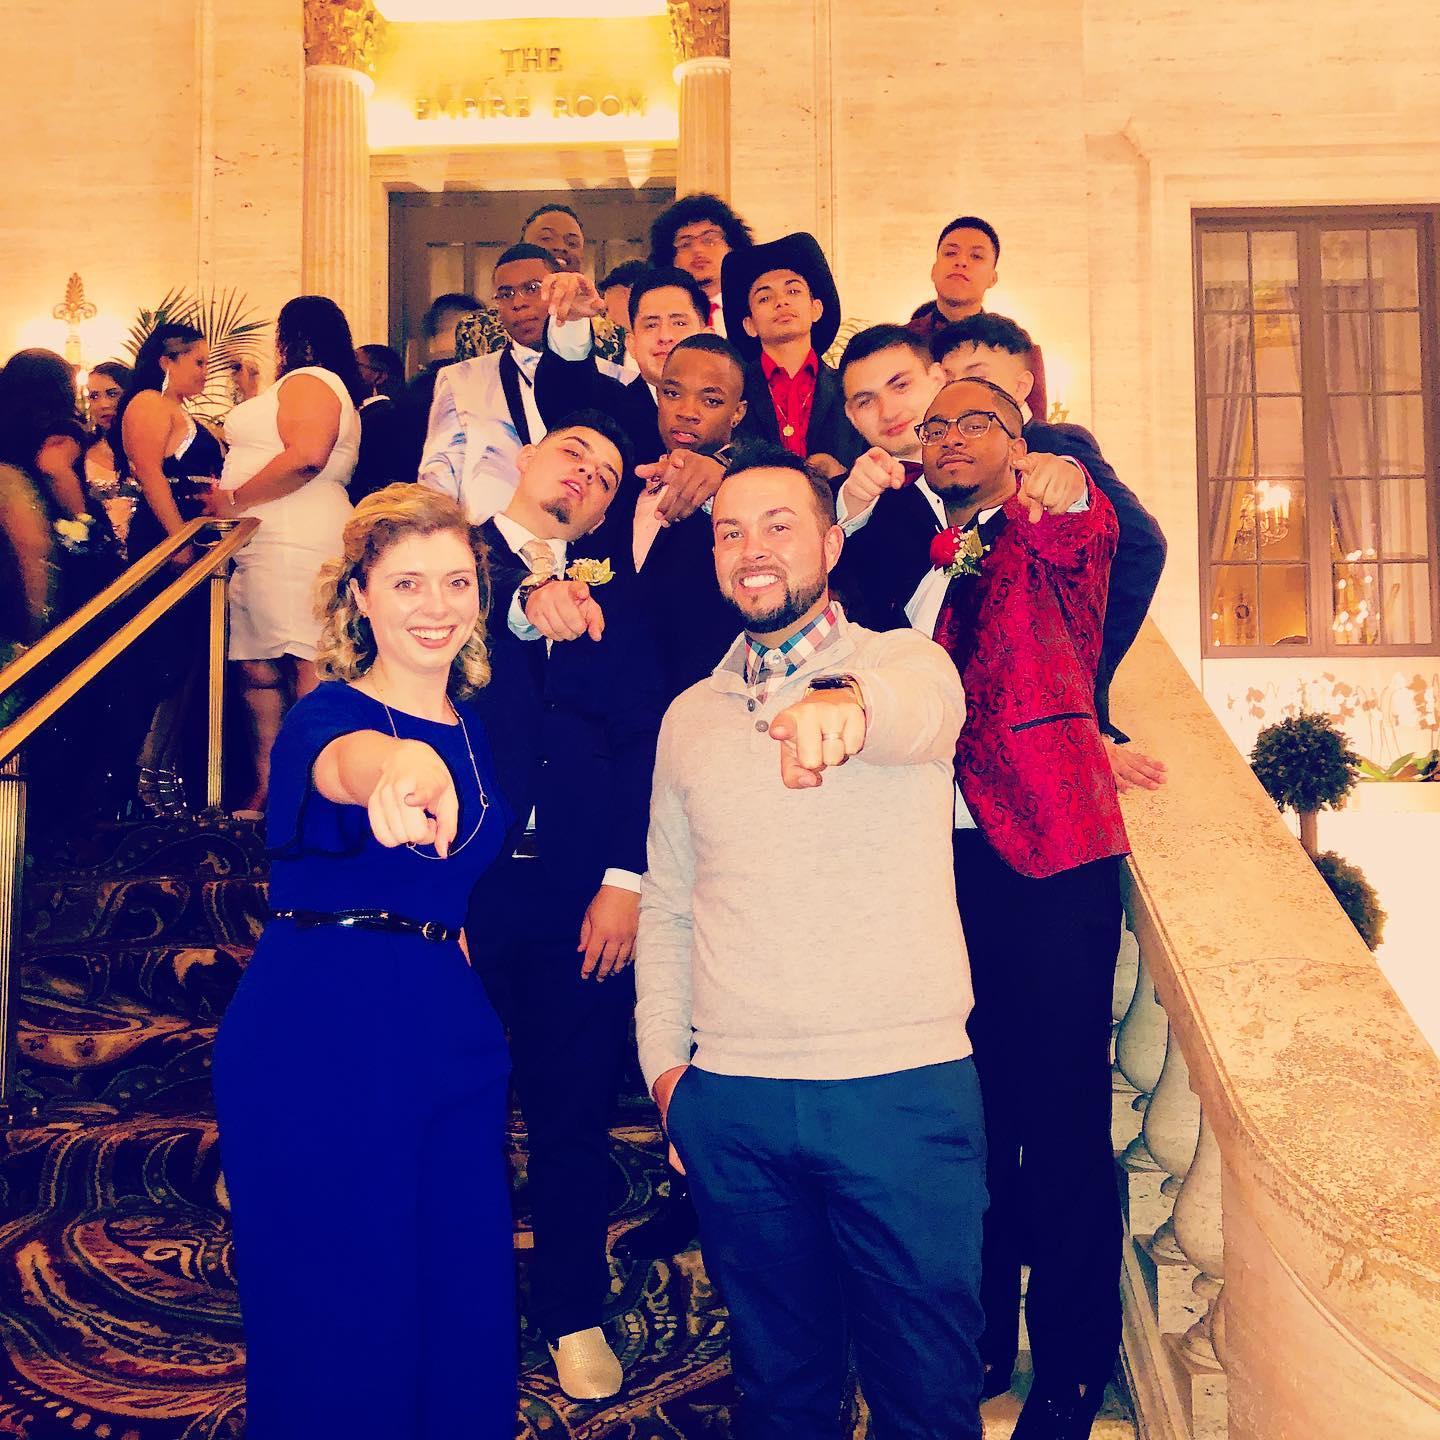 Photo of Chase Johnson-Espinoza and other party attendees on the stairs at a formal event. They are all pointing at the camera in a humorous way.